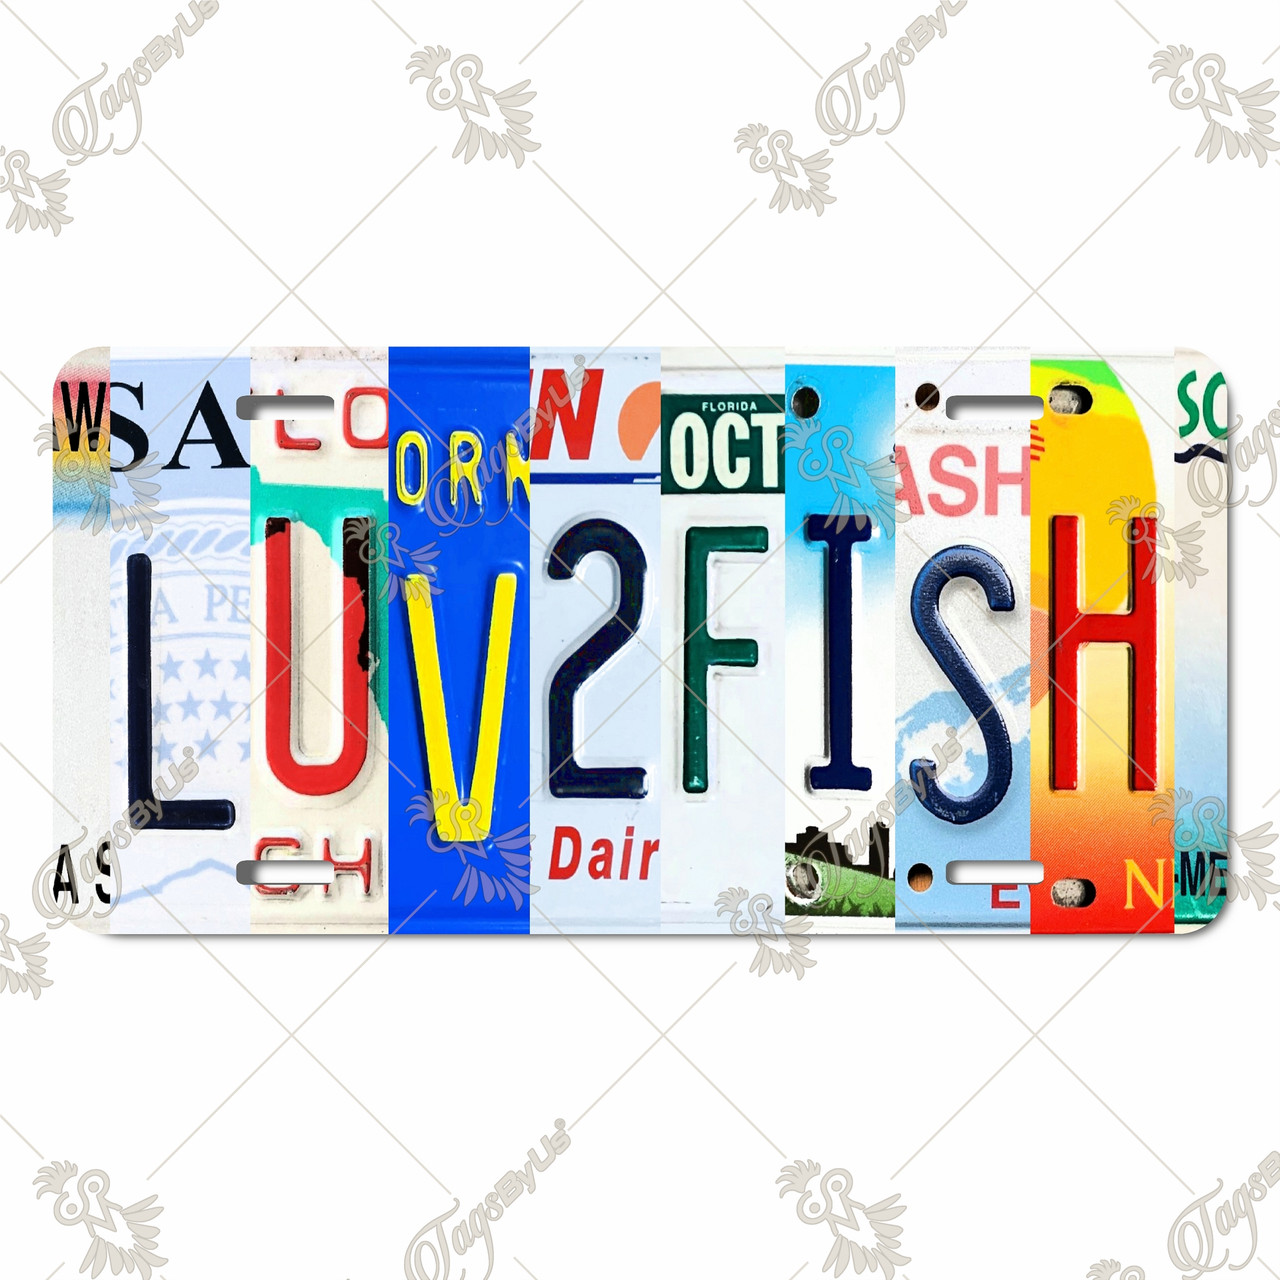 https://cdn11.bigcommerce.com/s-y1ny4m9xg5/images/stencil/1280x1280/products/445/1805/LP-TL049_Love_To_Fish__02000.1637007133.jpg?c=2